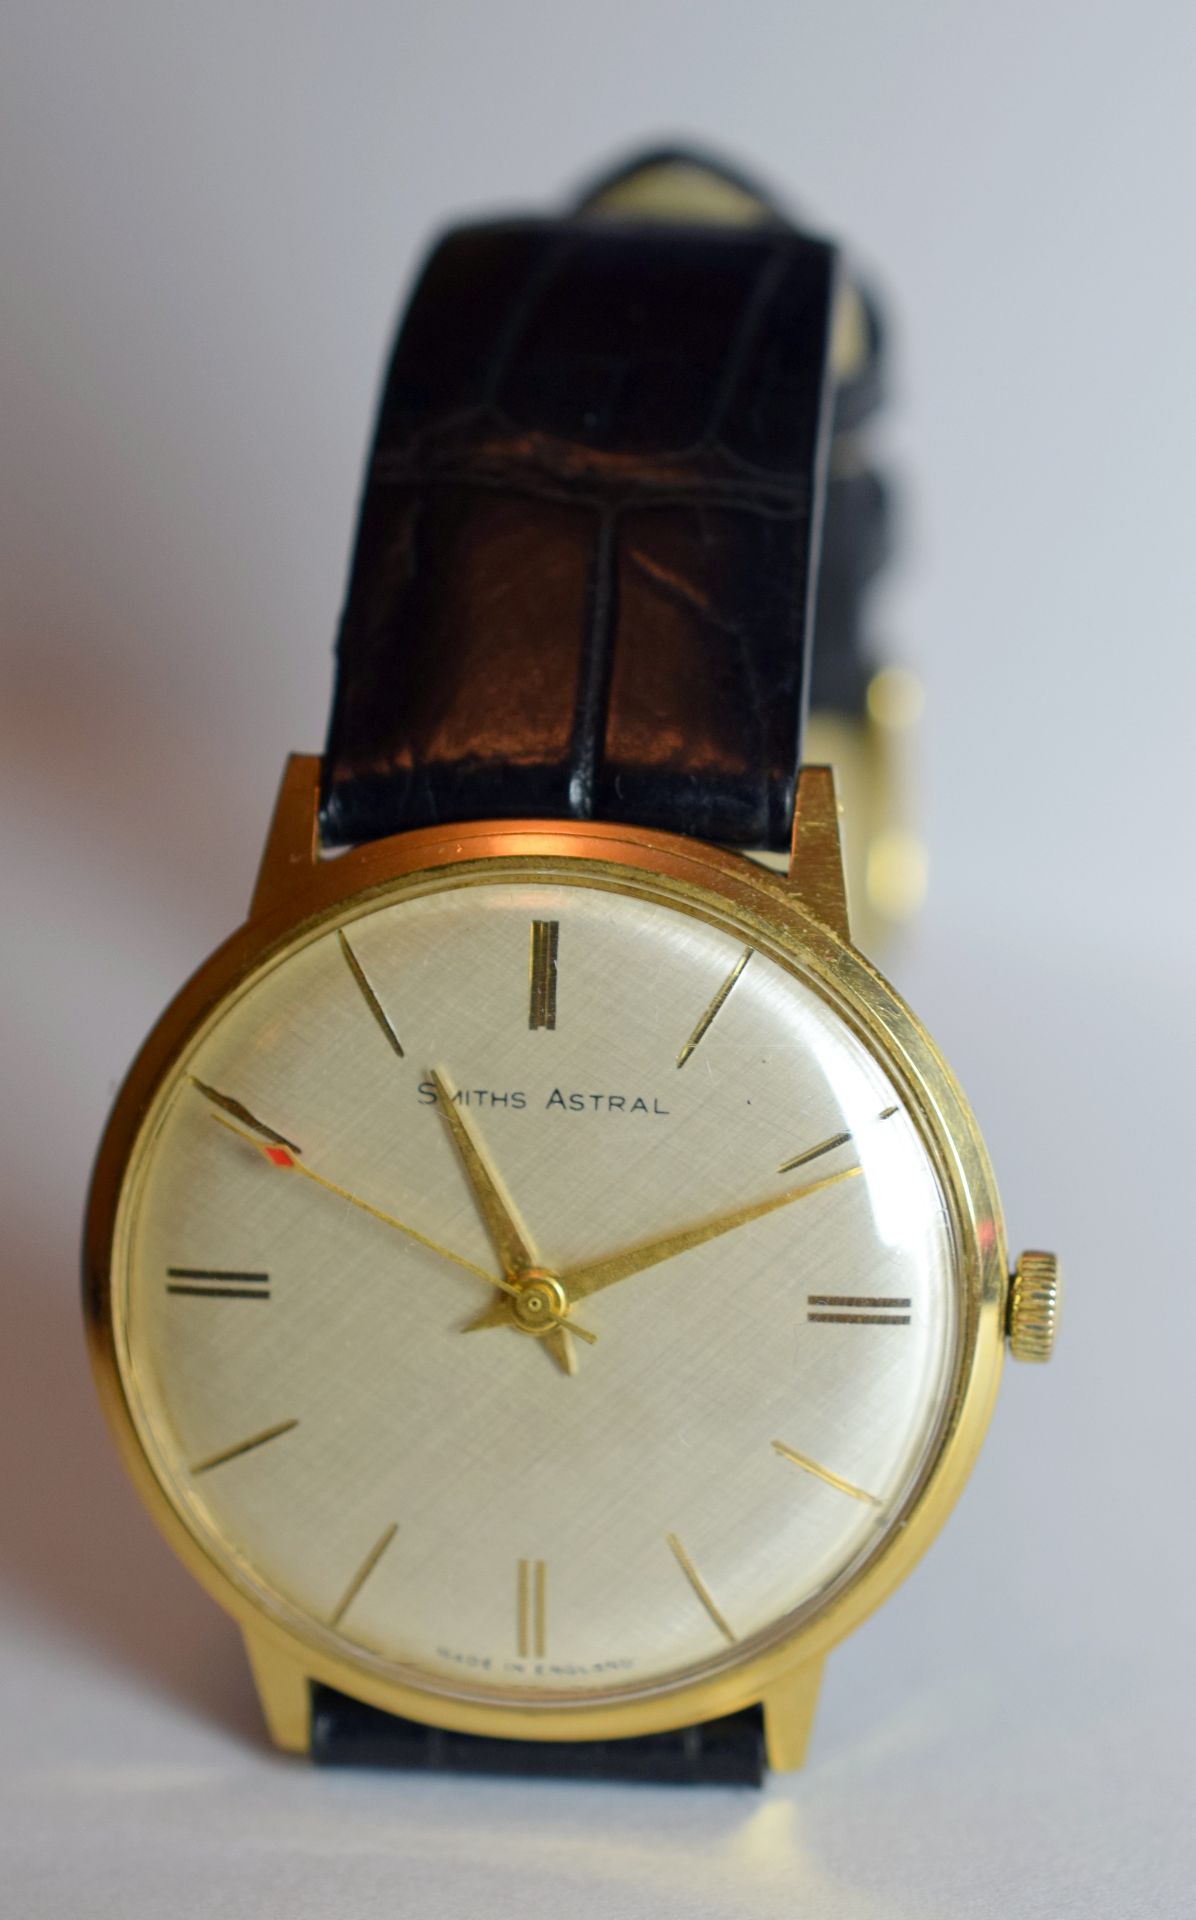 Smiths Astral Gentleman's Wristwatch - Image 2 of 5